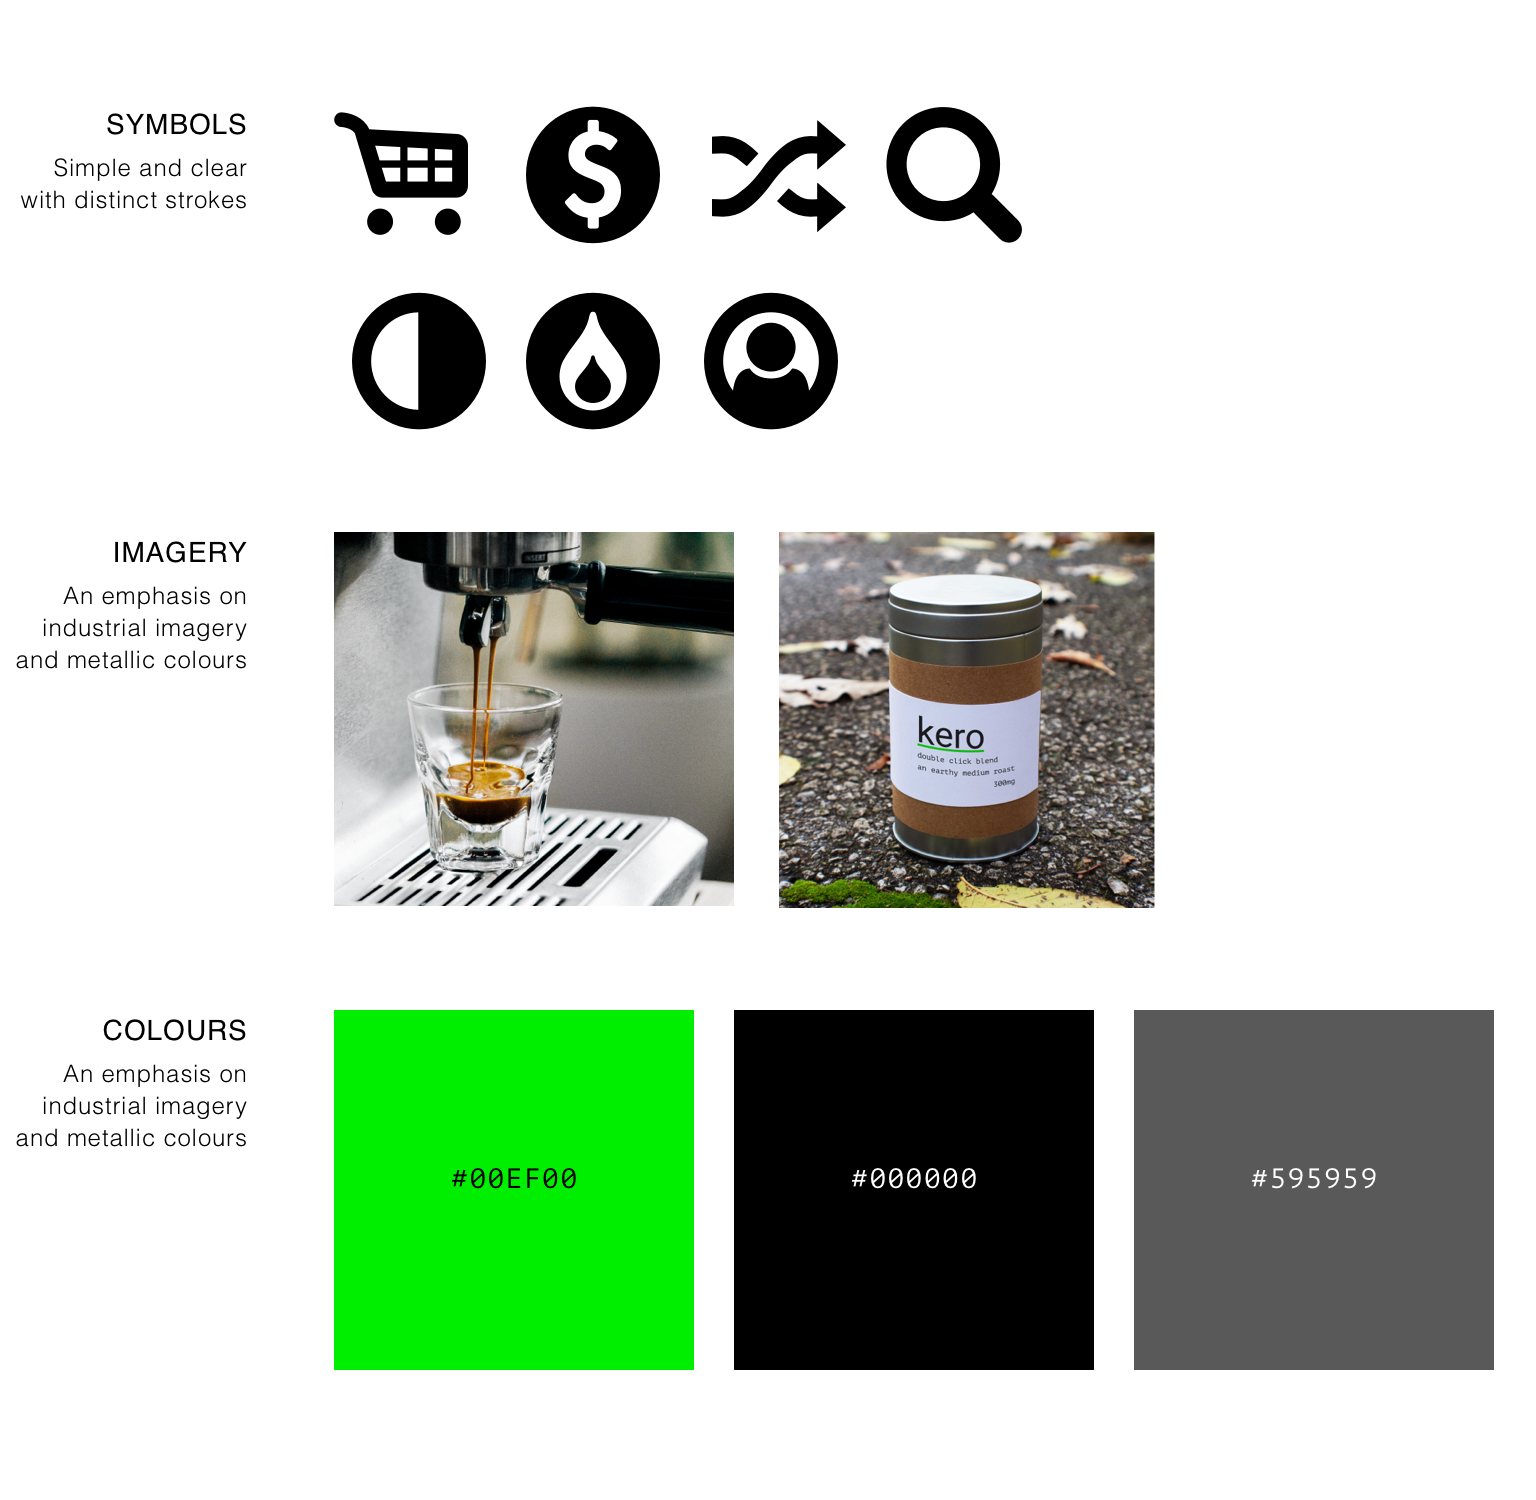 The colour and imagery palette for Kero Coffee